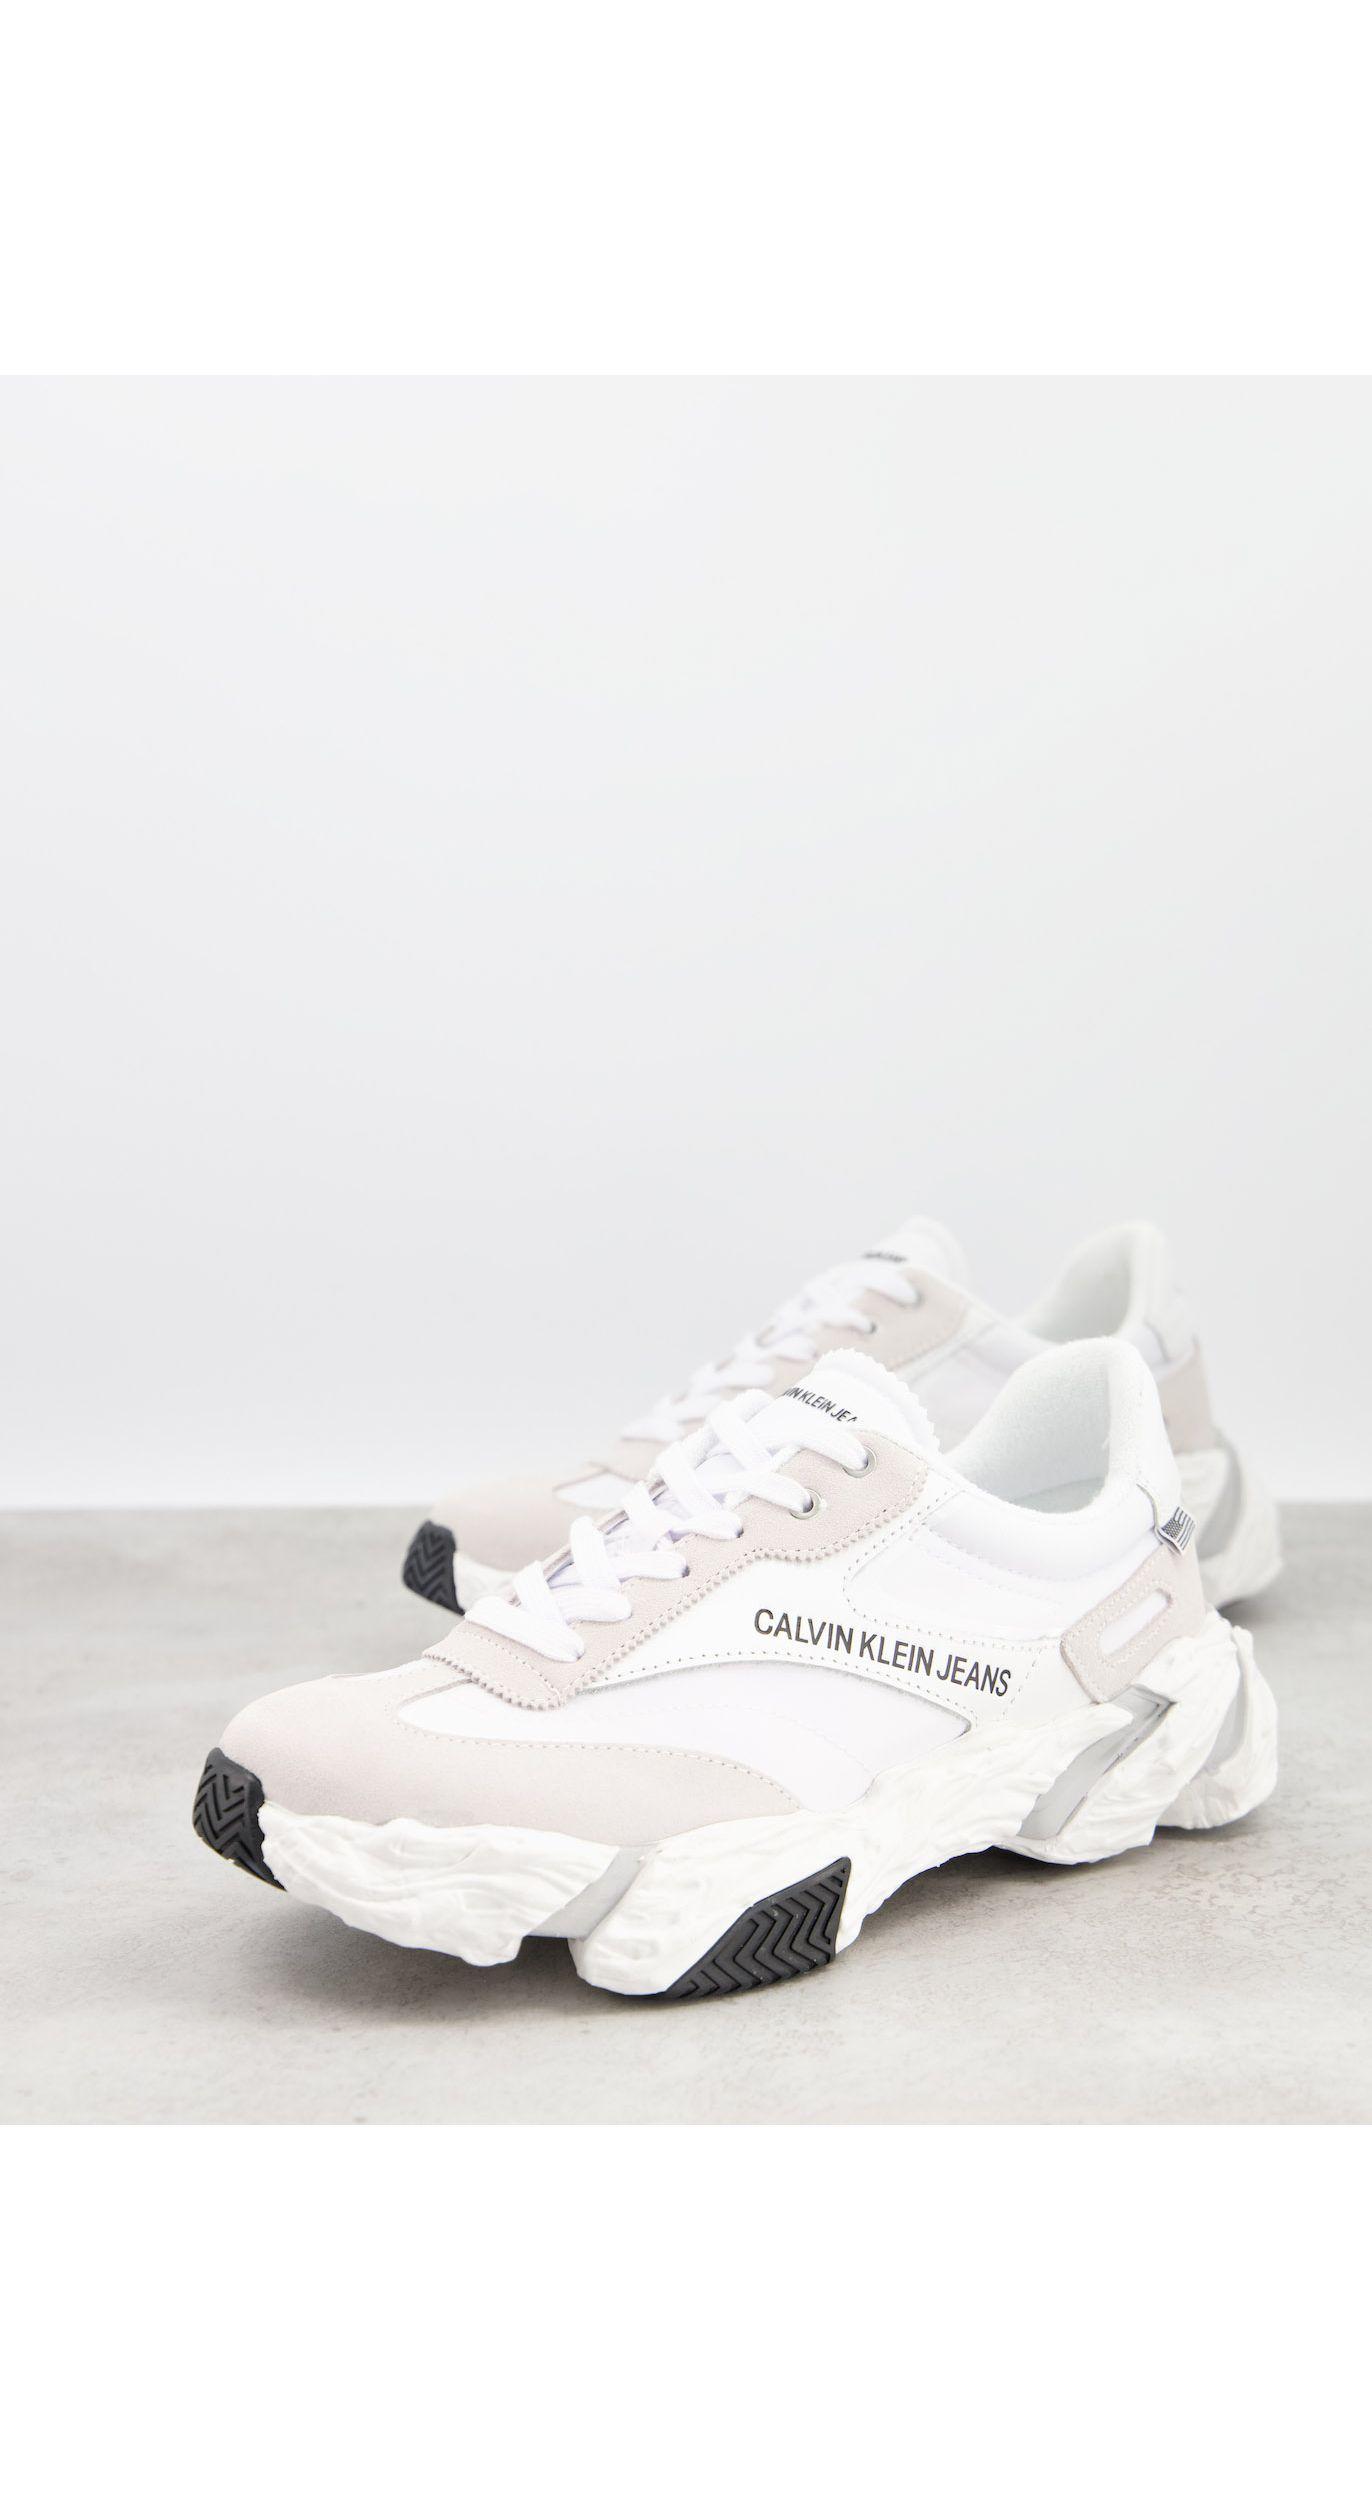 Calvin Klein Jeans Solaris Trainers in White for Men | Lyst